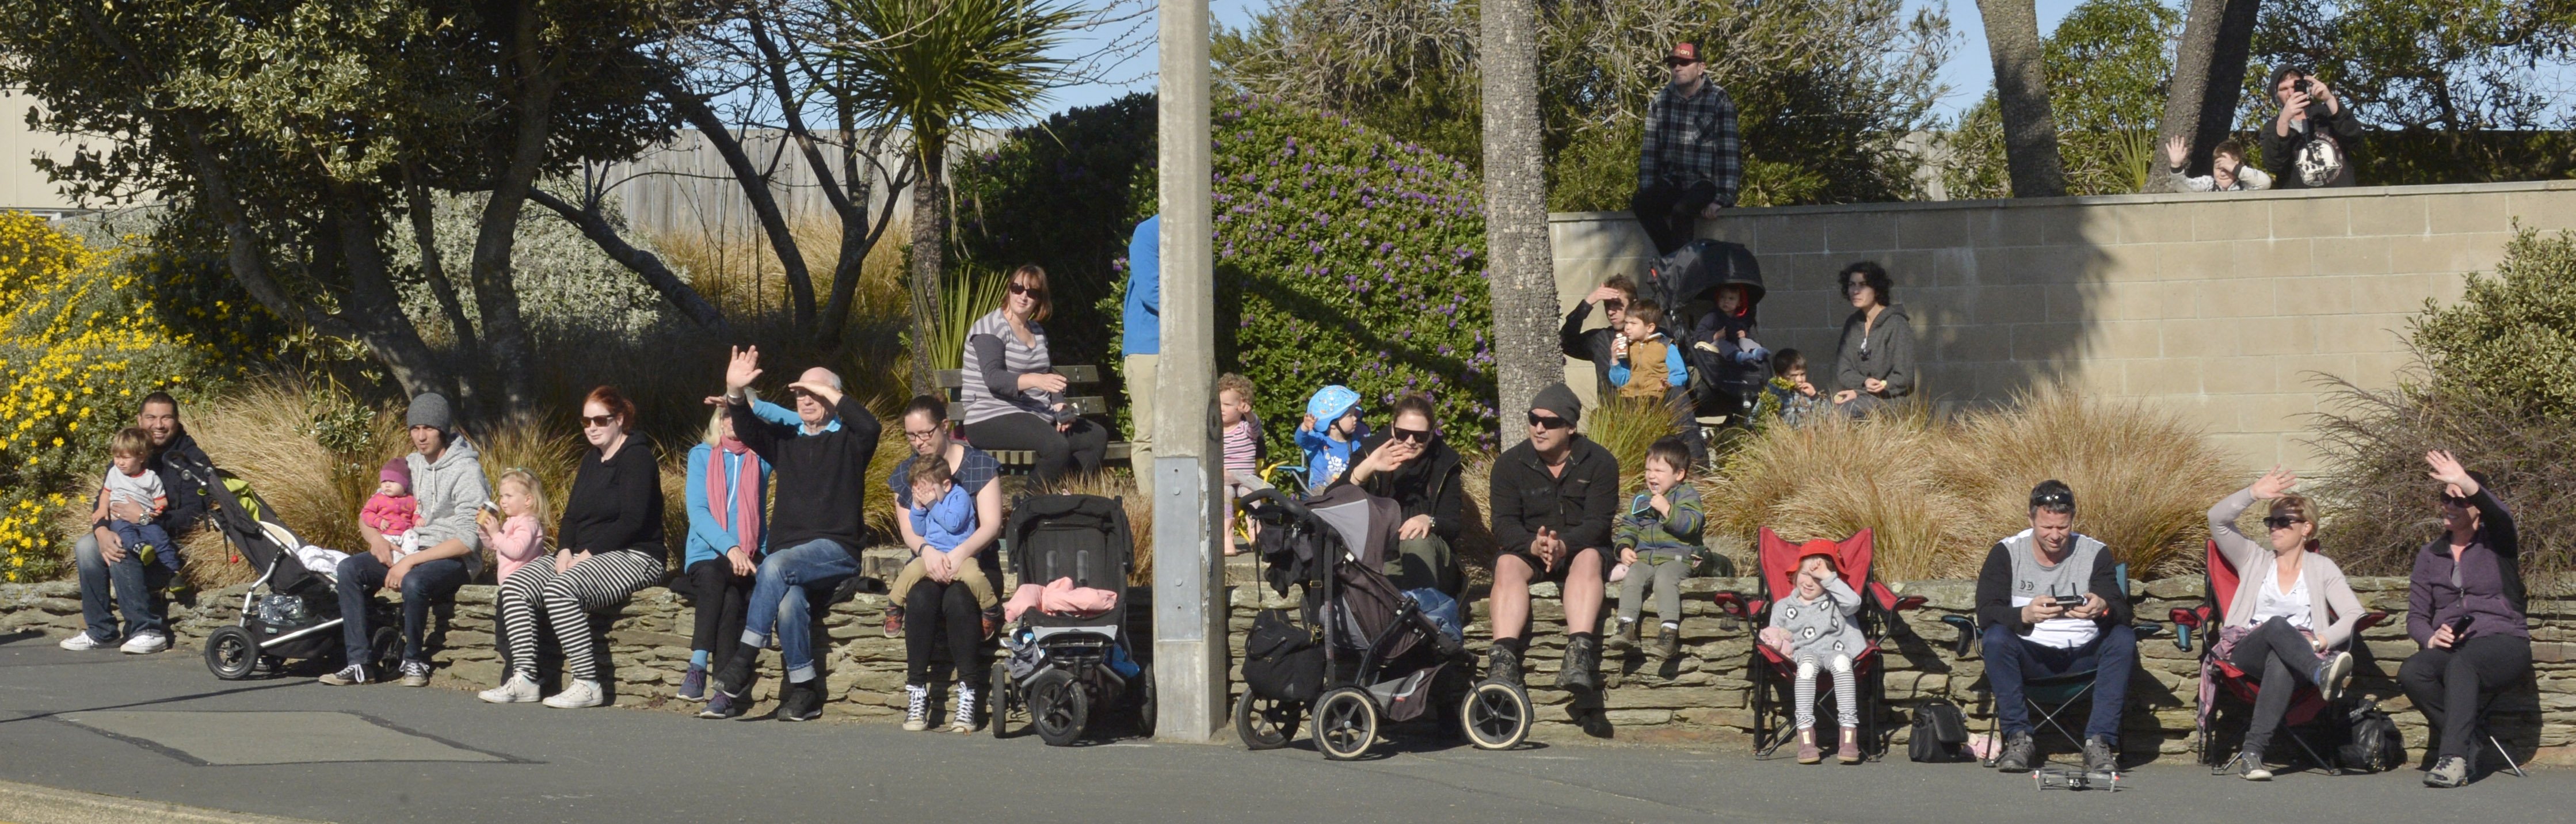 Large groups of people line the streets of Dunedin to watch more than 200 trucks drive past each...